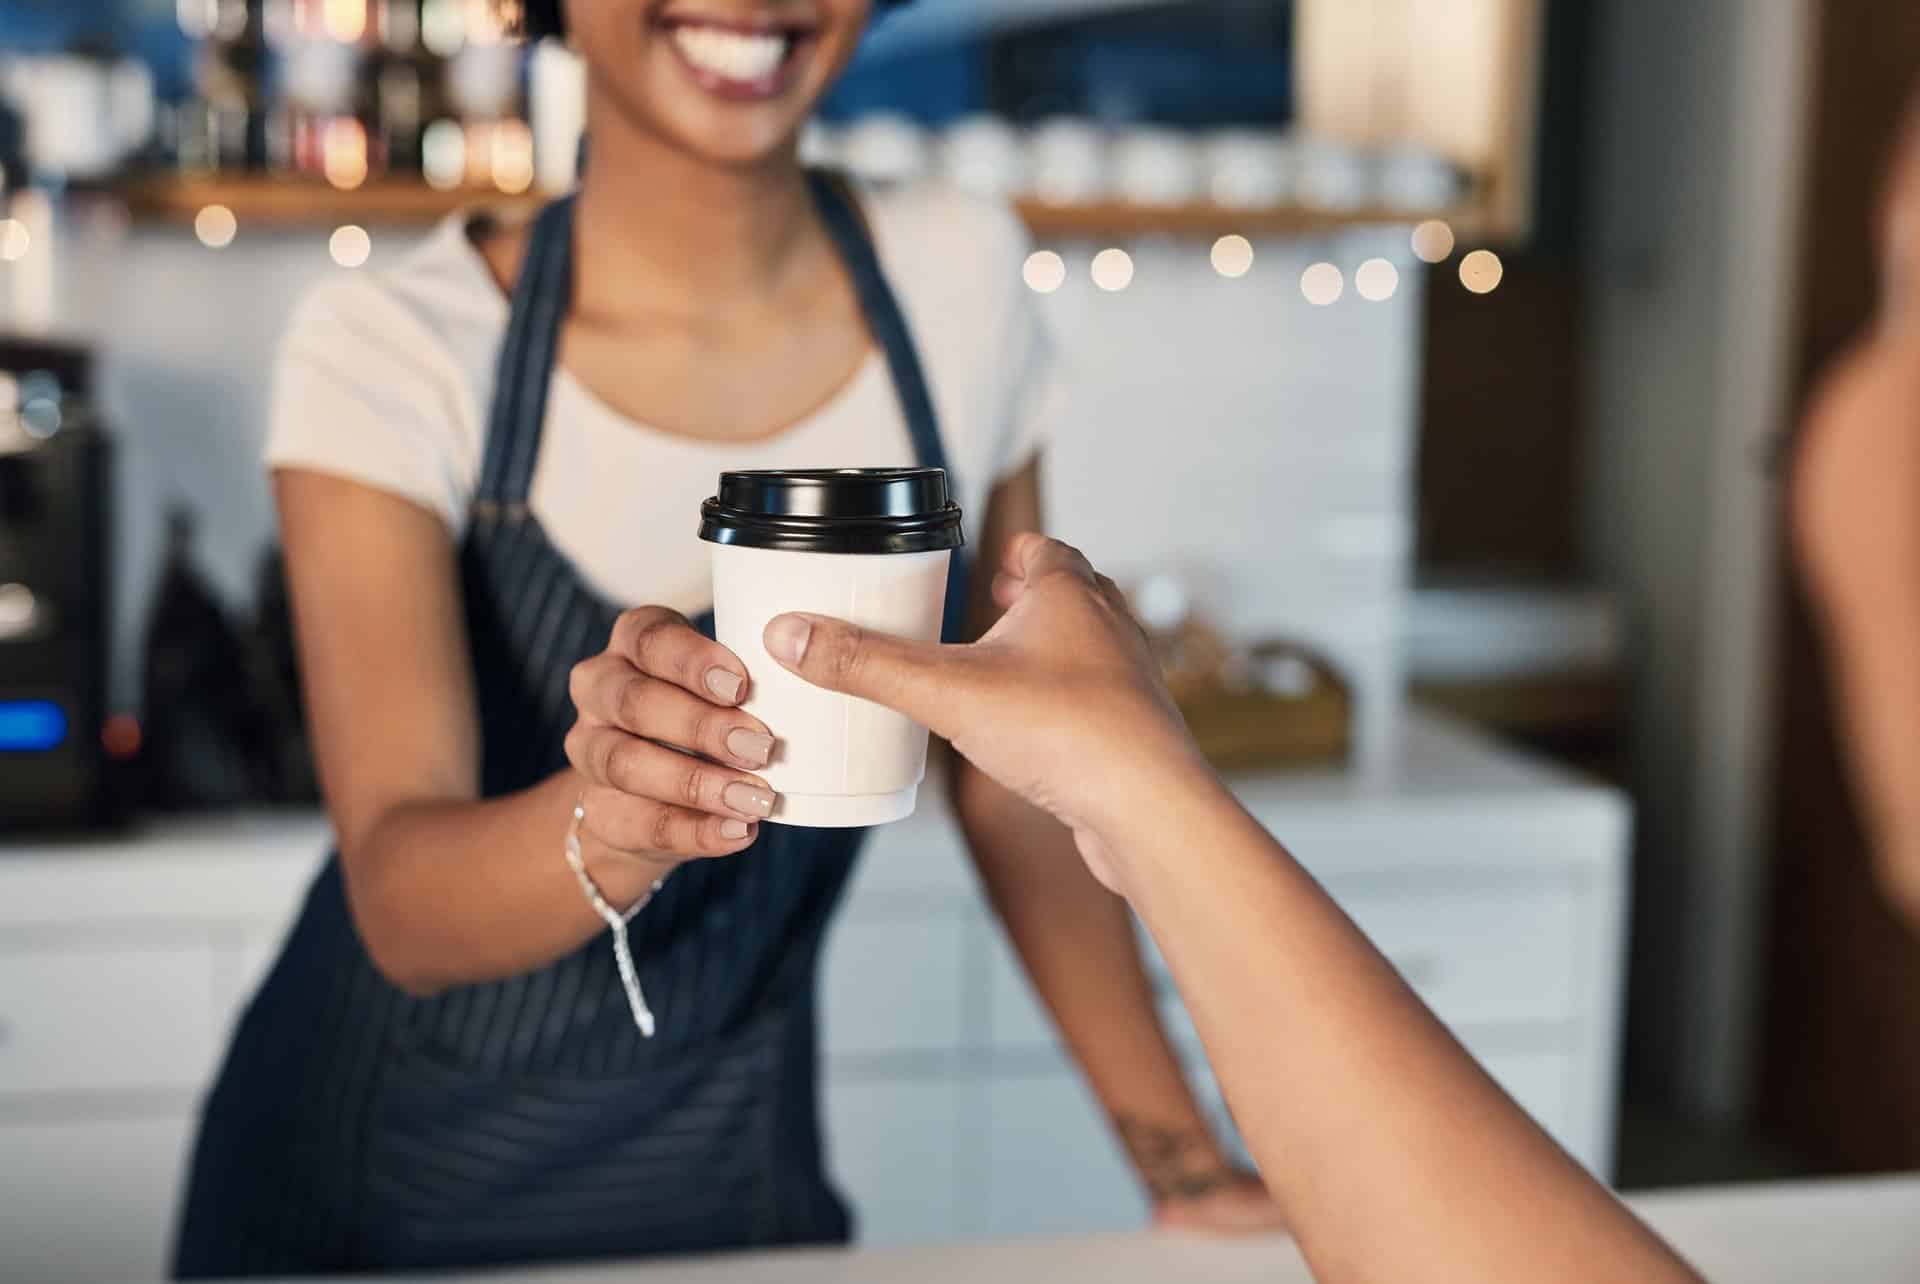 Barista handing a customer a cup of coffee